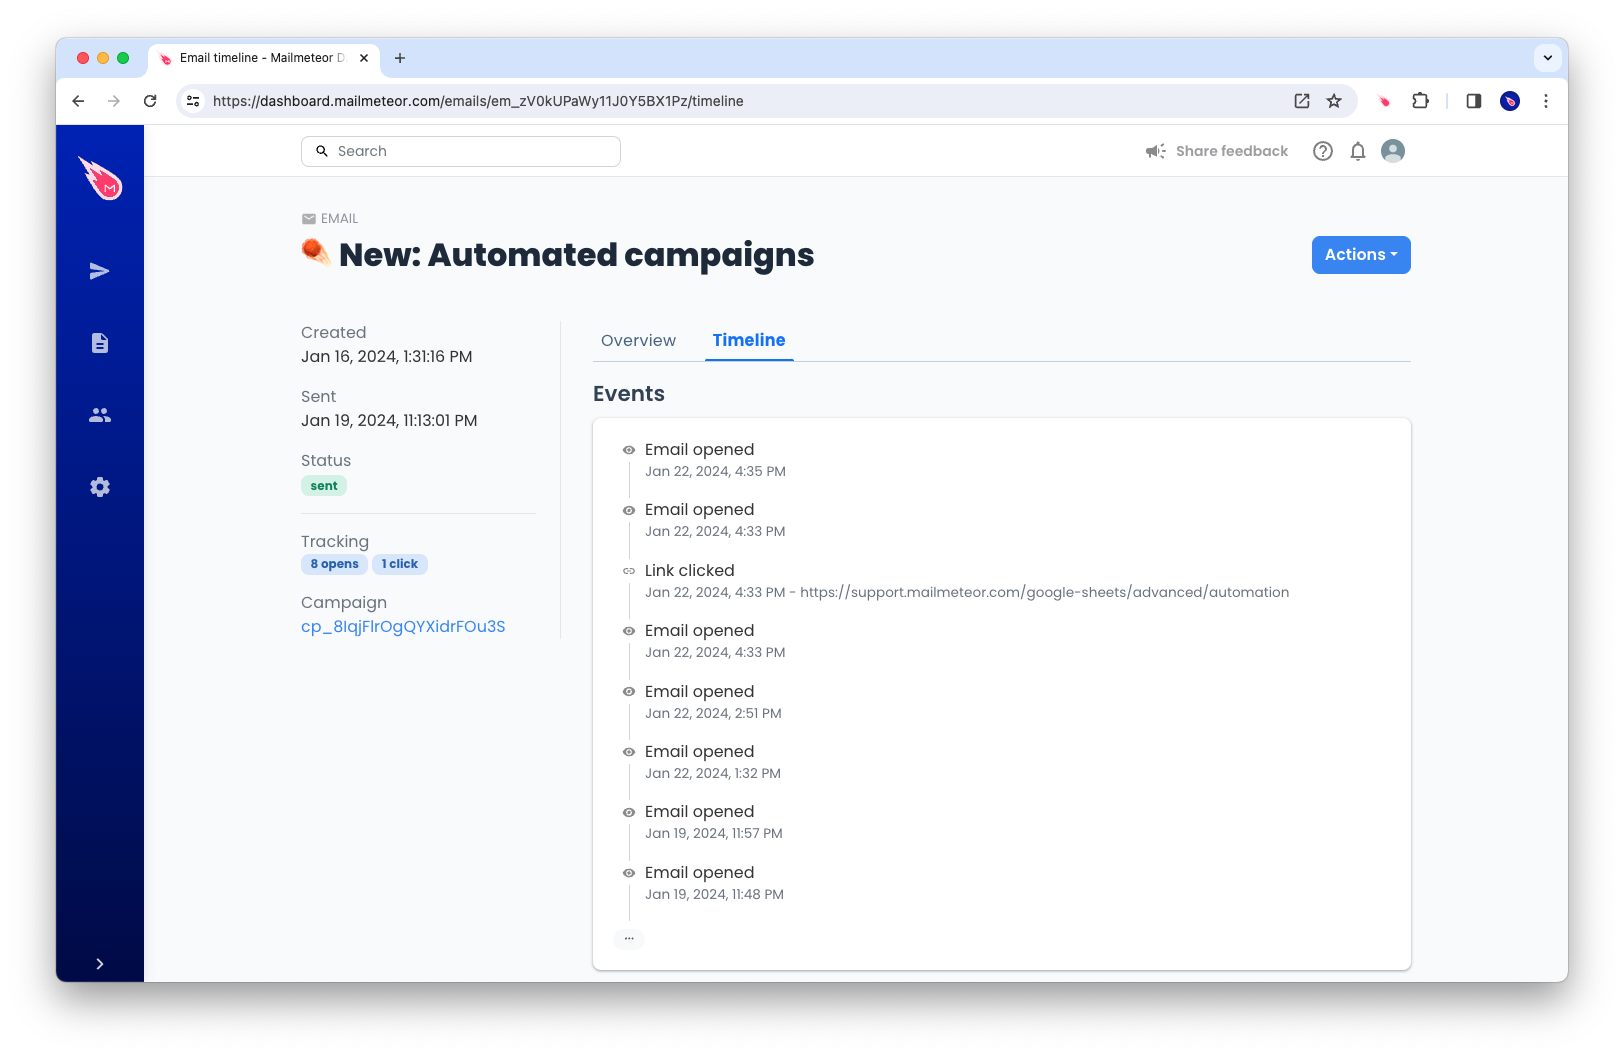 Timeline of an email activity in Mailmeteor Dashboard